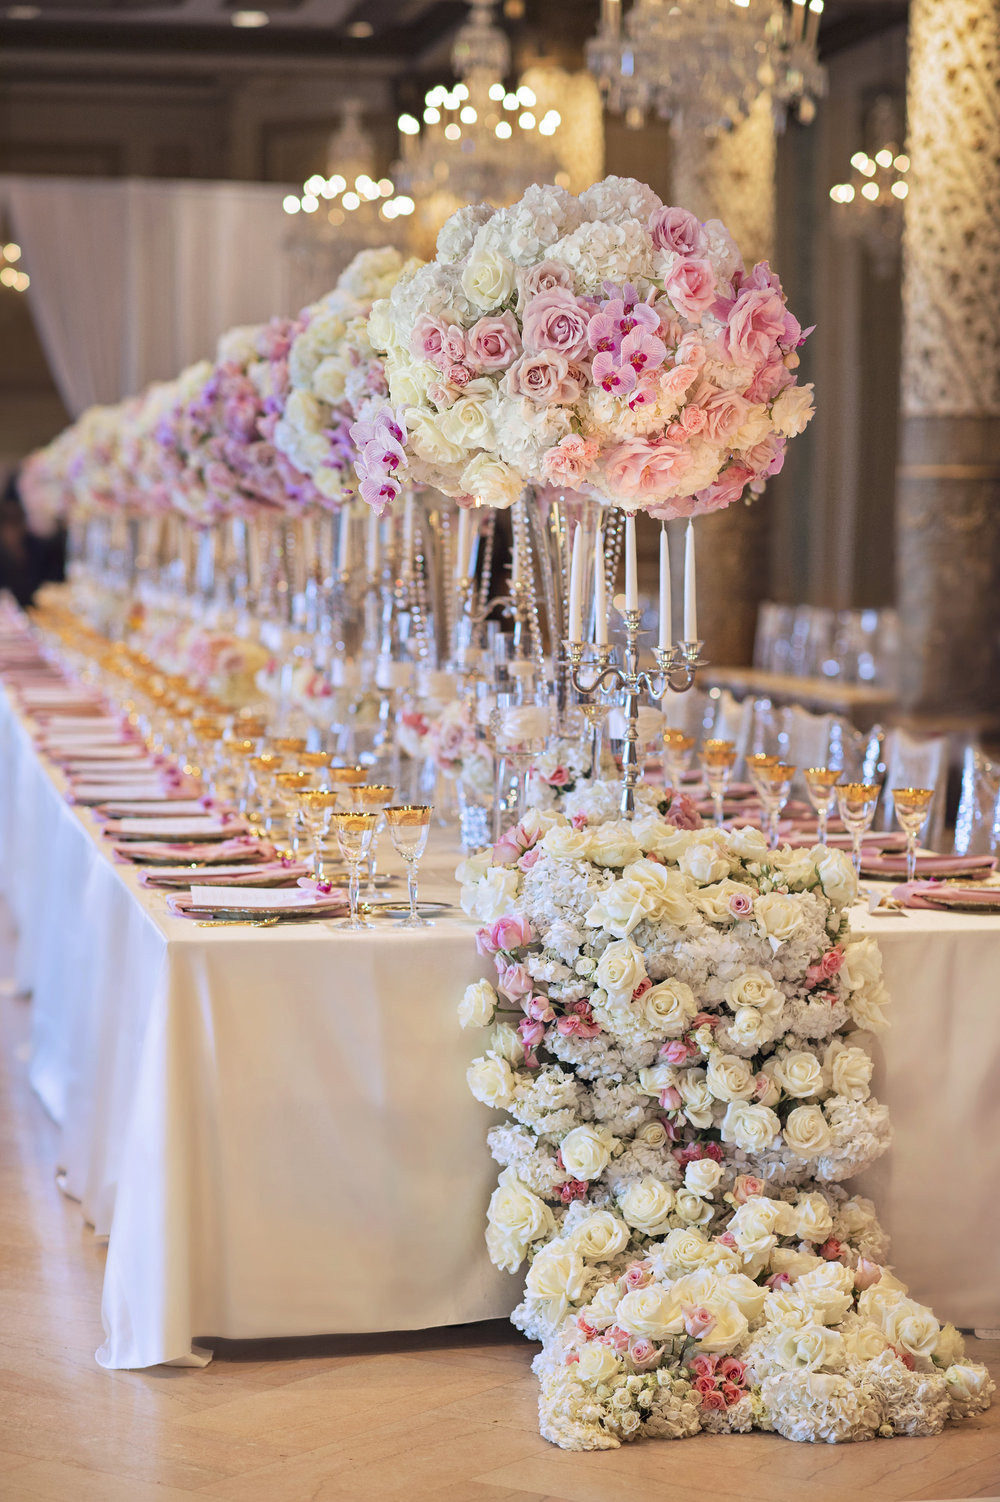 Table Decorations For Wedding Reception
 Wedding Ideas Long Reception Tables Belle The Magazine